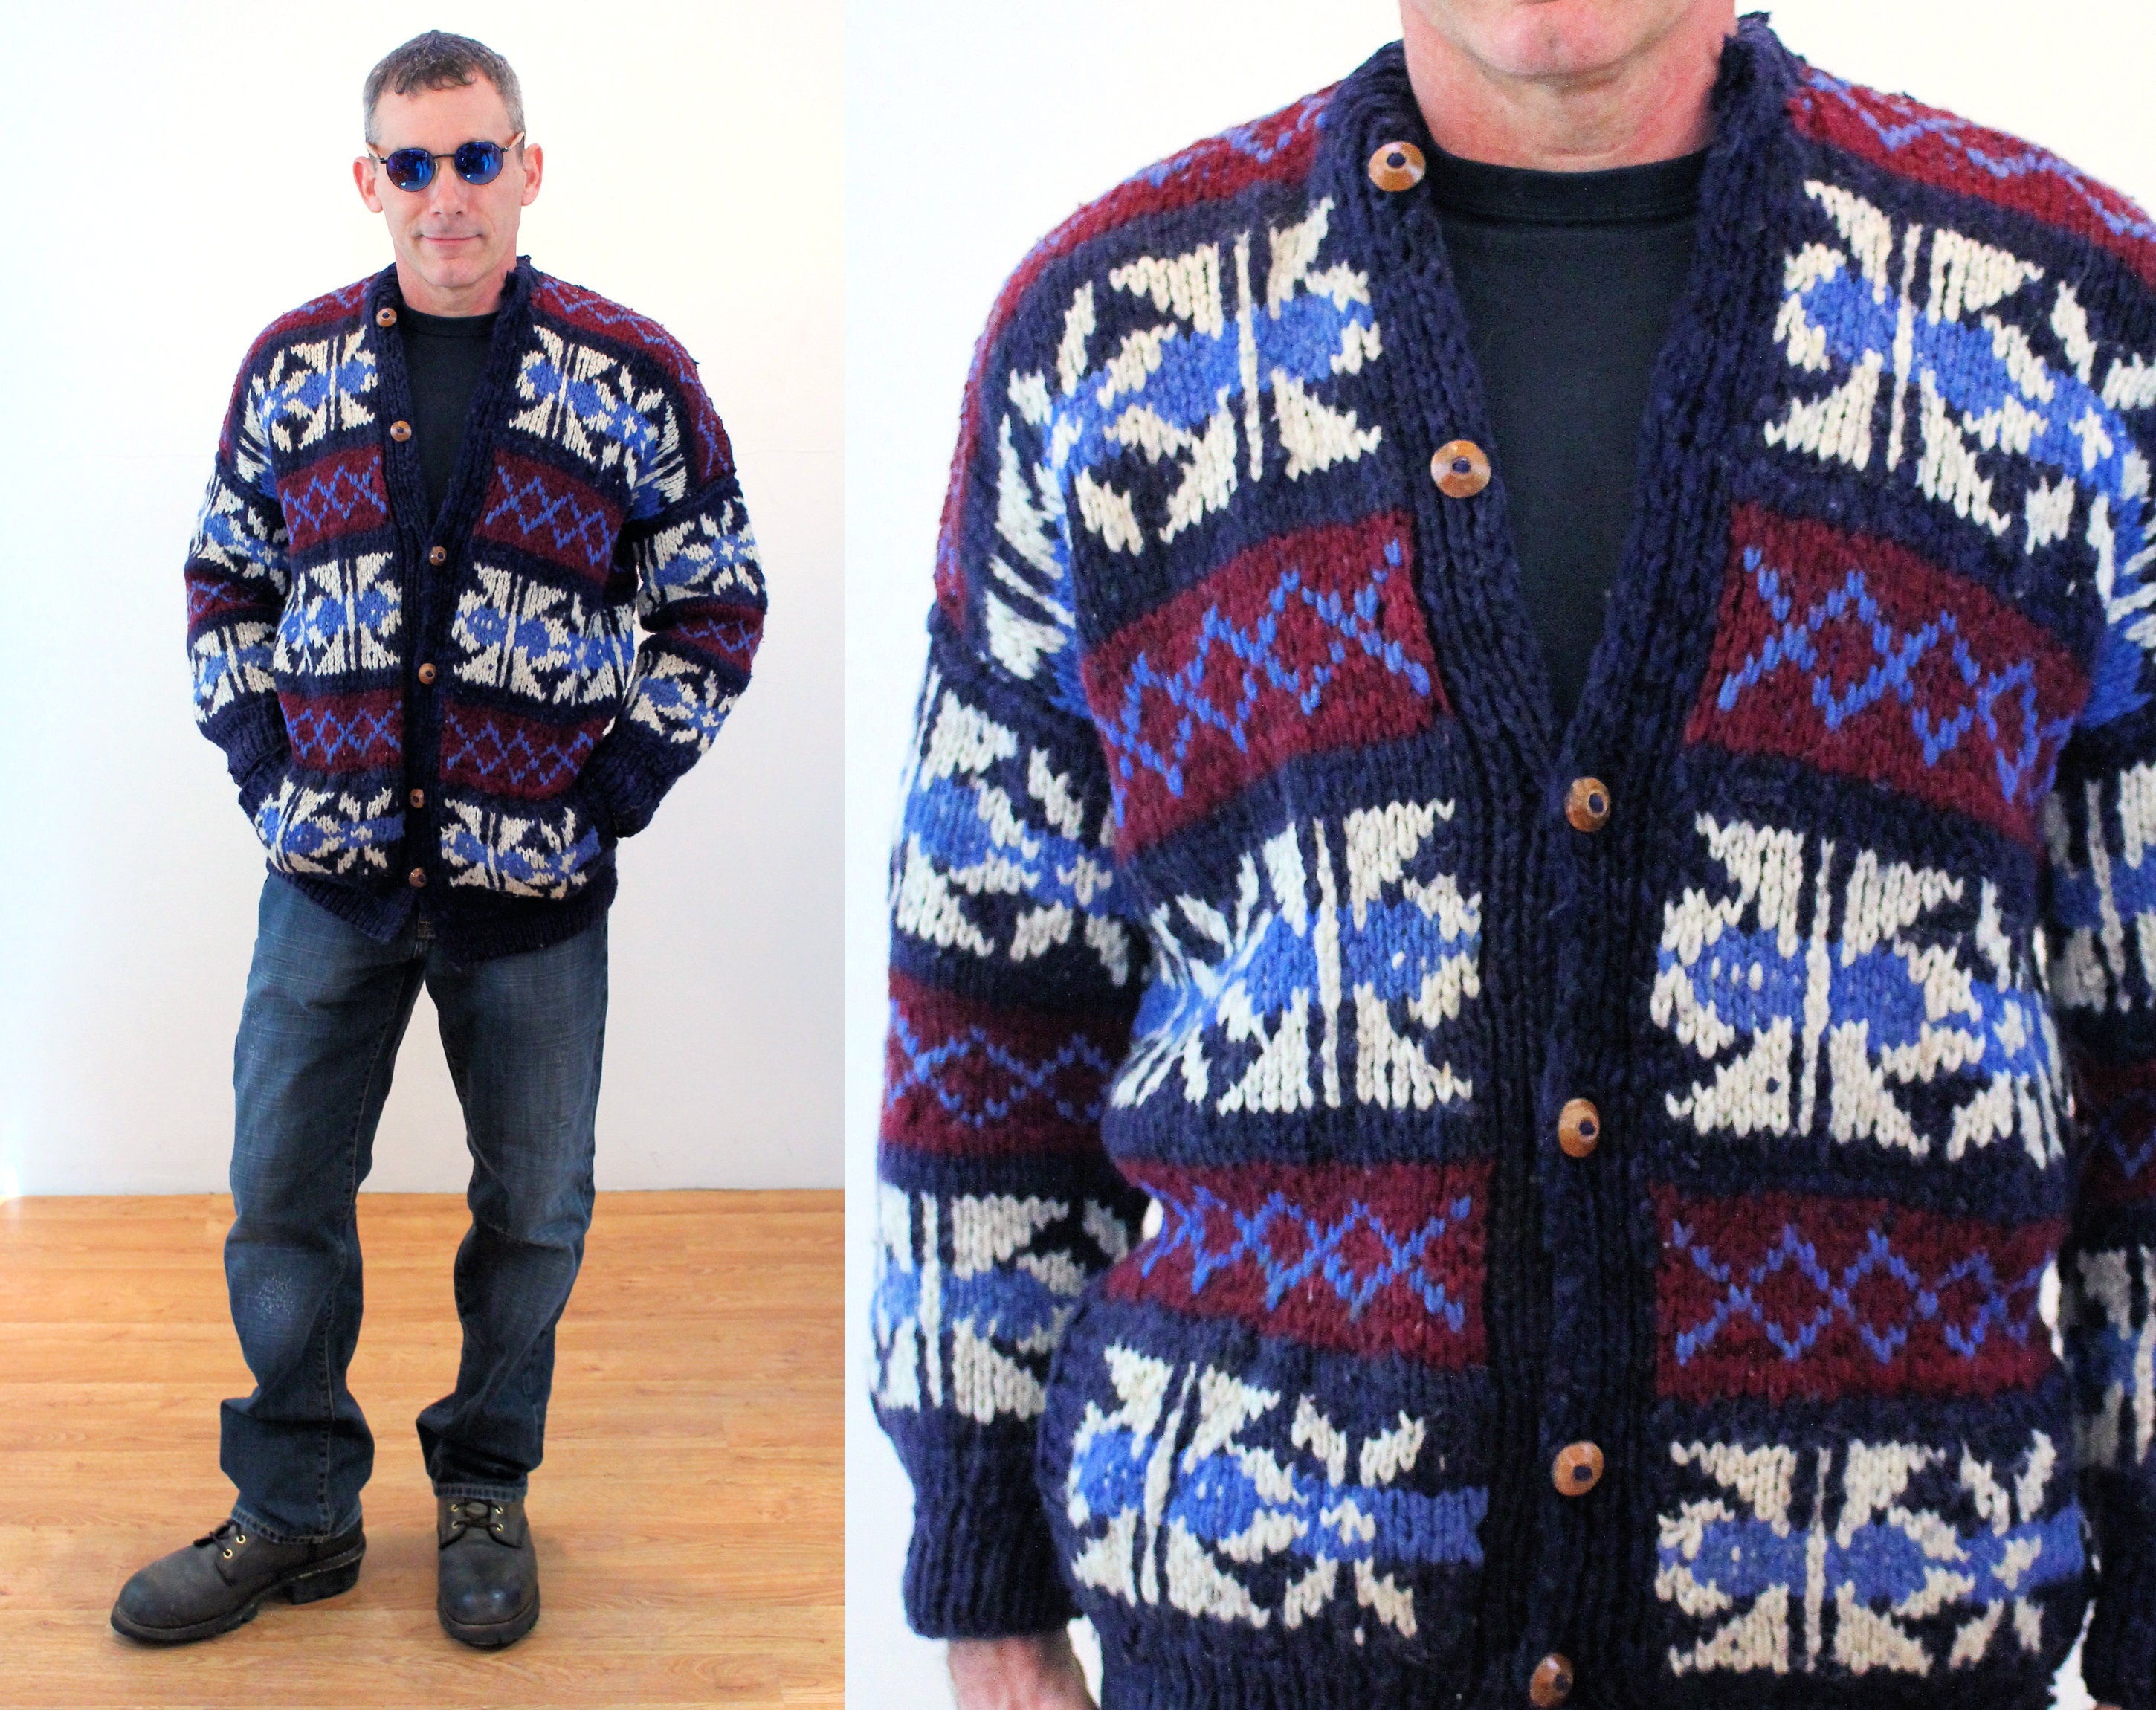 Gift for Him or Her Vintage 80's 100% Wool Off-White Ethnic Geometric Patterned Knitwear Pullover Sweater Cardigan Winter Holiday